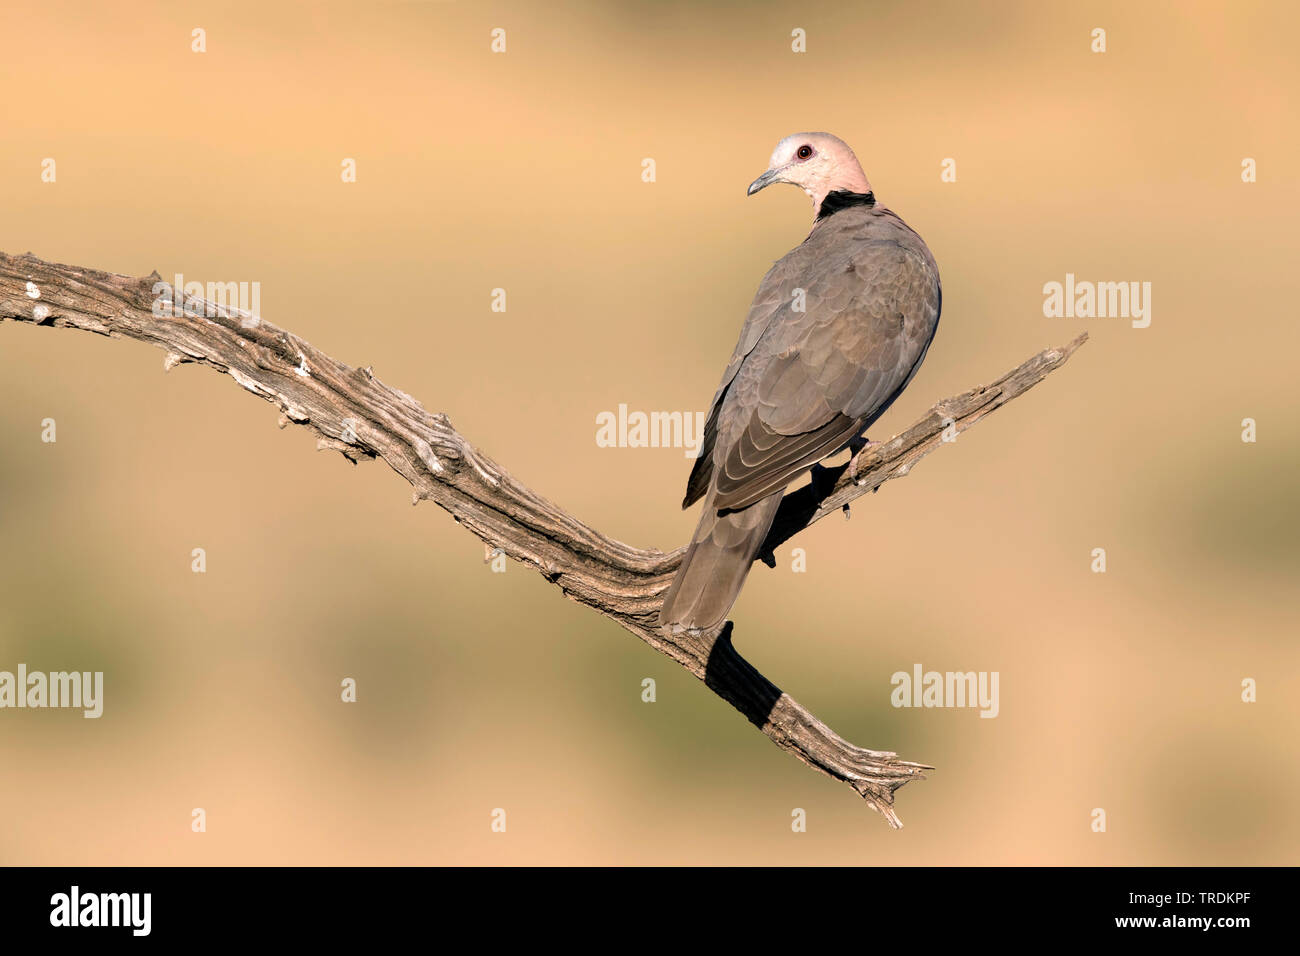 Ring-necked Dove, Cape Turtle Dove, Half-Collared Dove (Streptopelia capicola), sitting on branch, South Africa, Mpumalanga, Kruger National Park Stock Photo